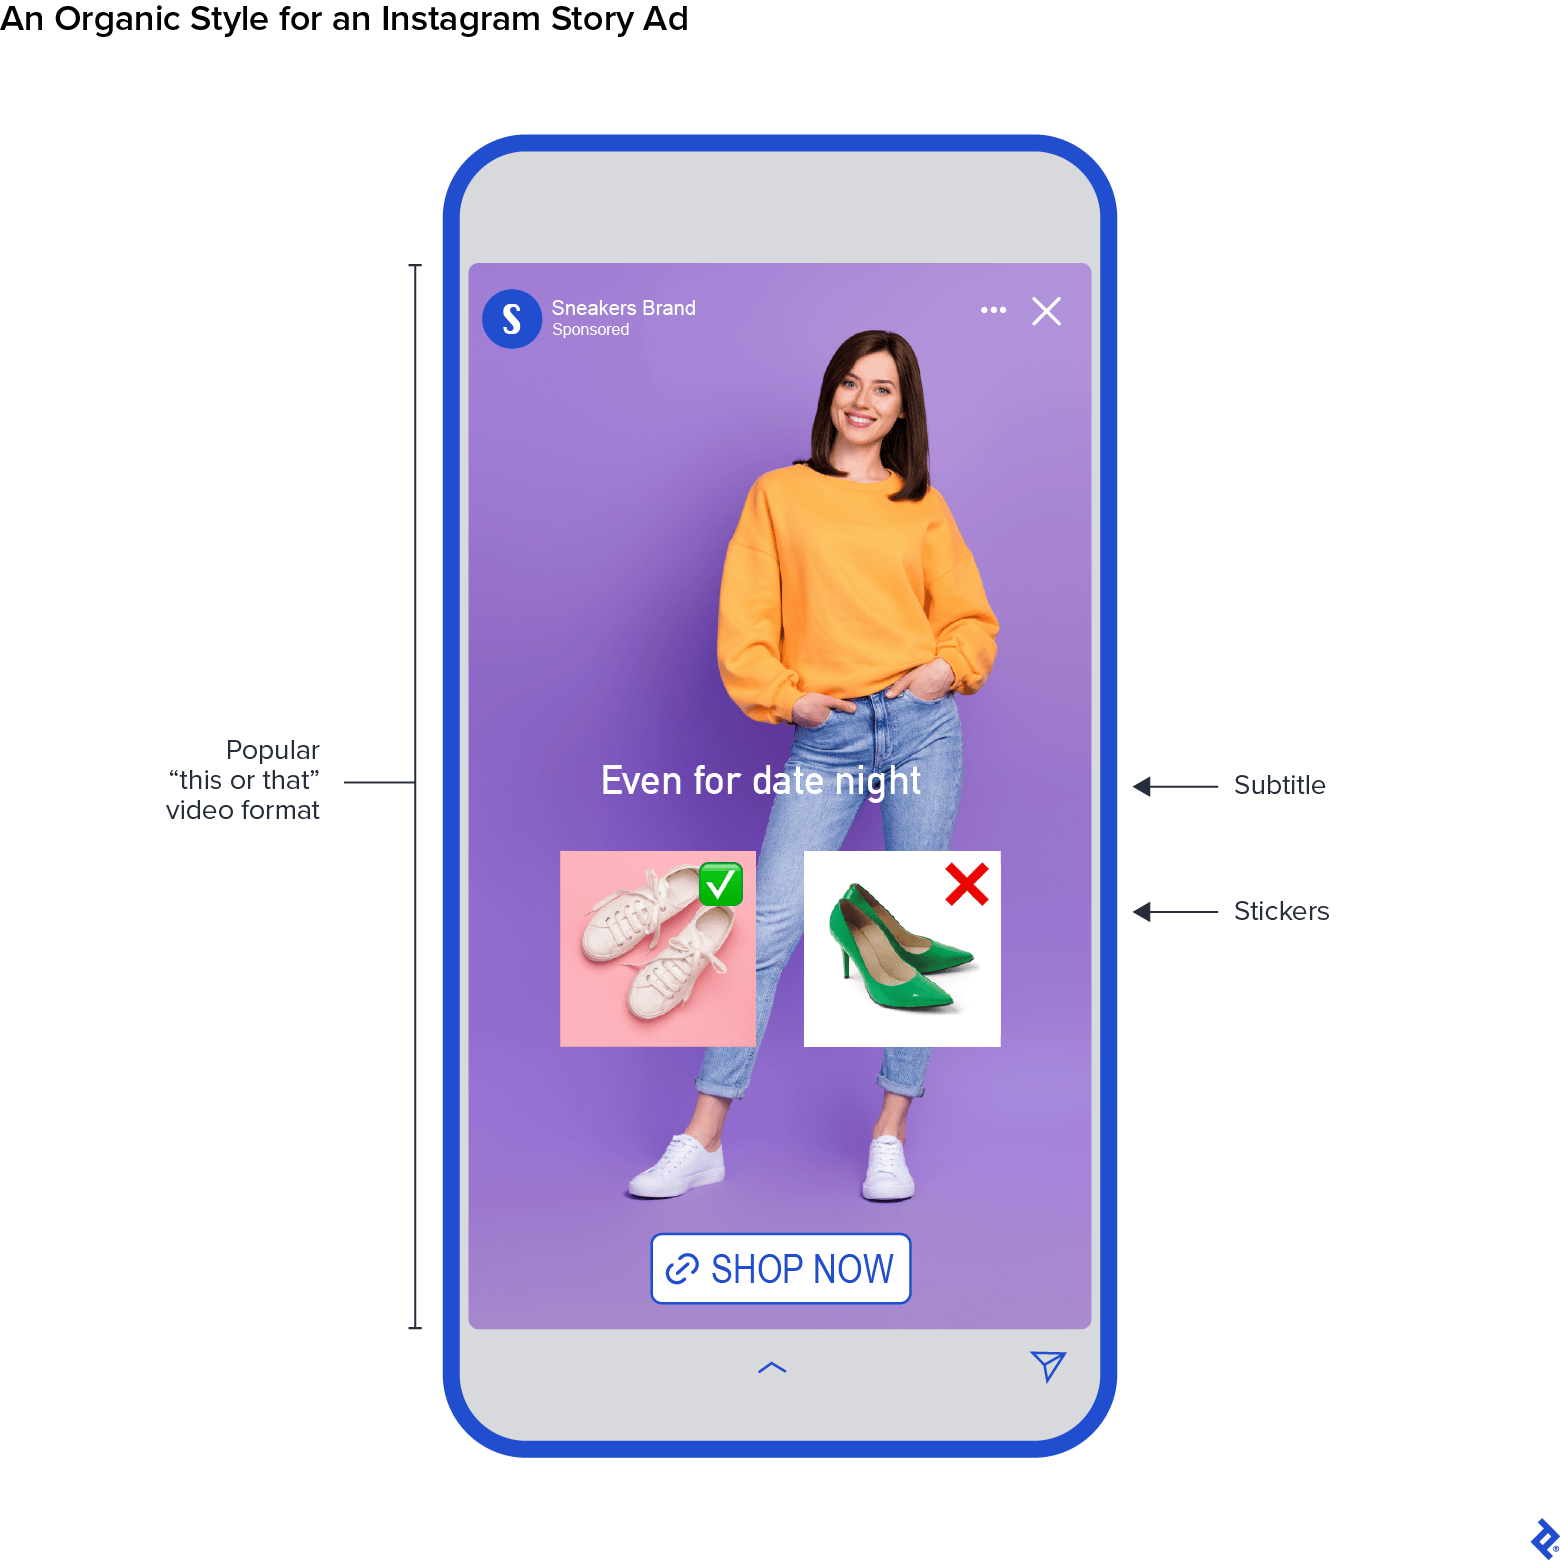 A mobile example of organic styles for an Instagram Stories ad shows a popular video format (e.g., a “this or that” comparison), subtitles, and stickers.